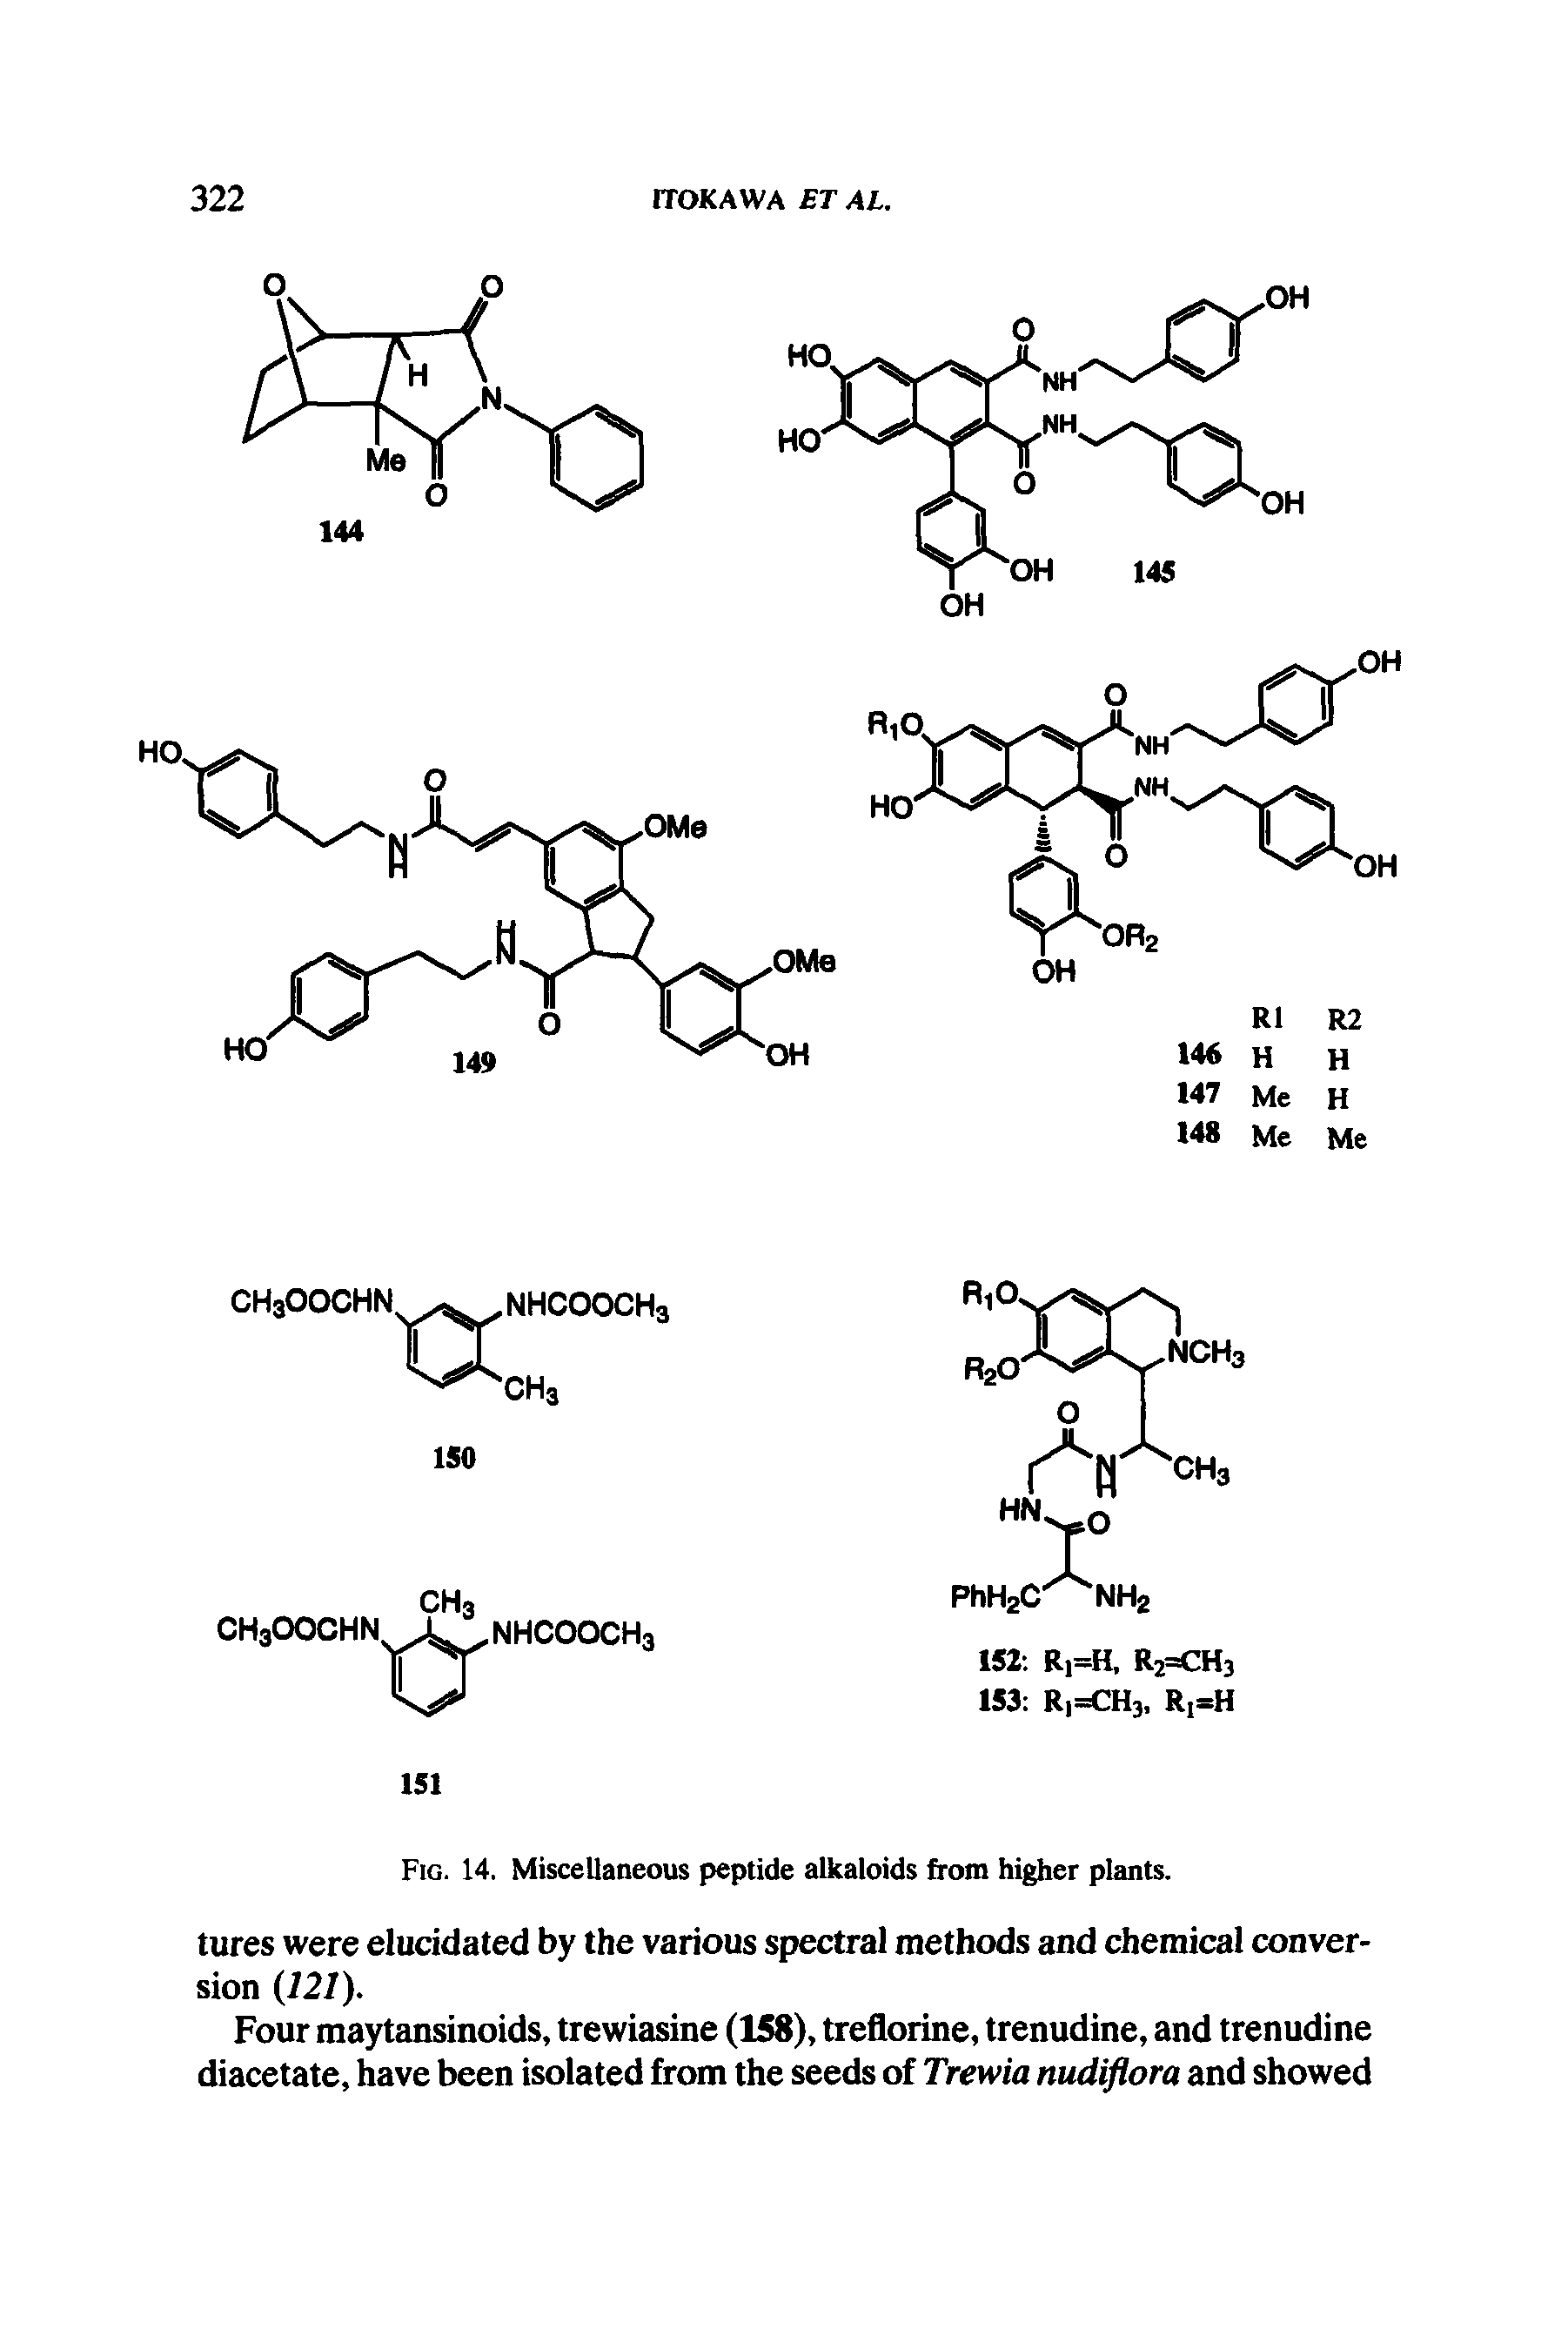 Fig. 14. Miscellaneous peptide alkaloids from higher plants.